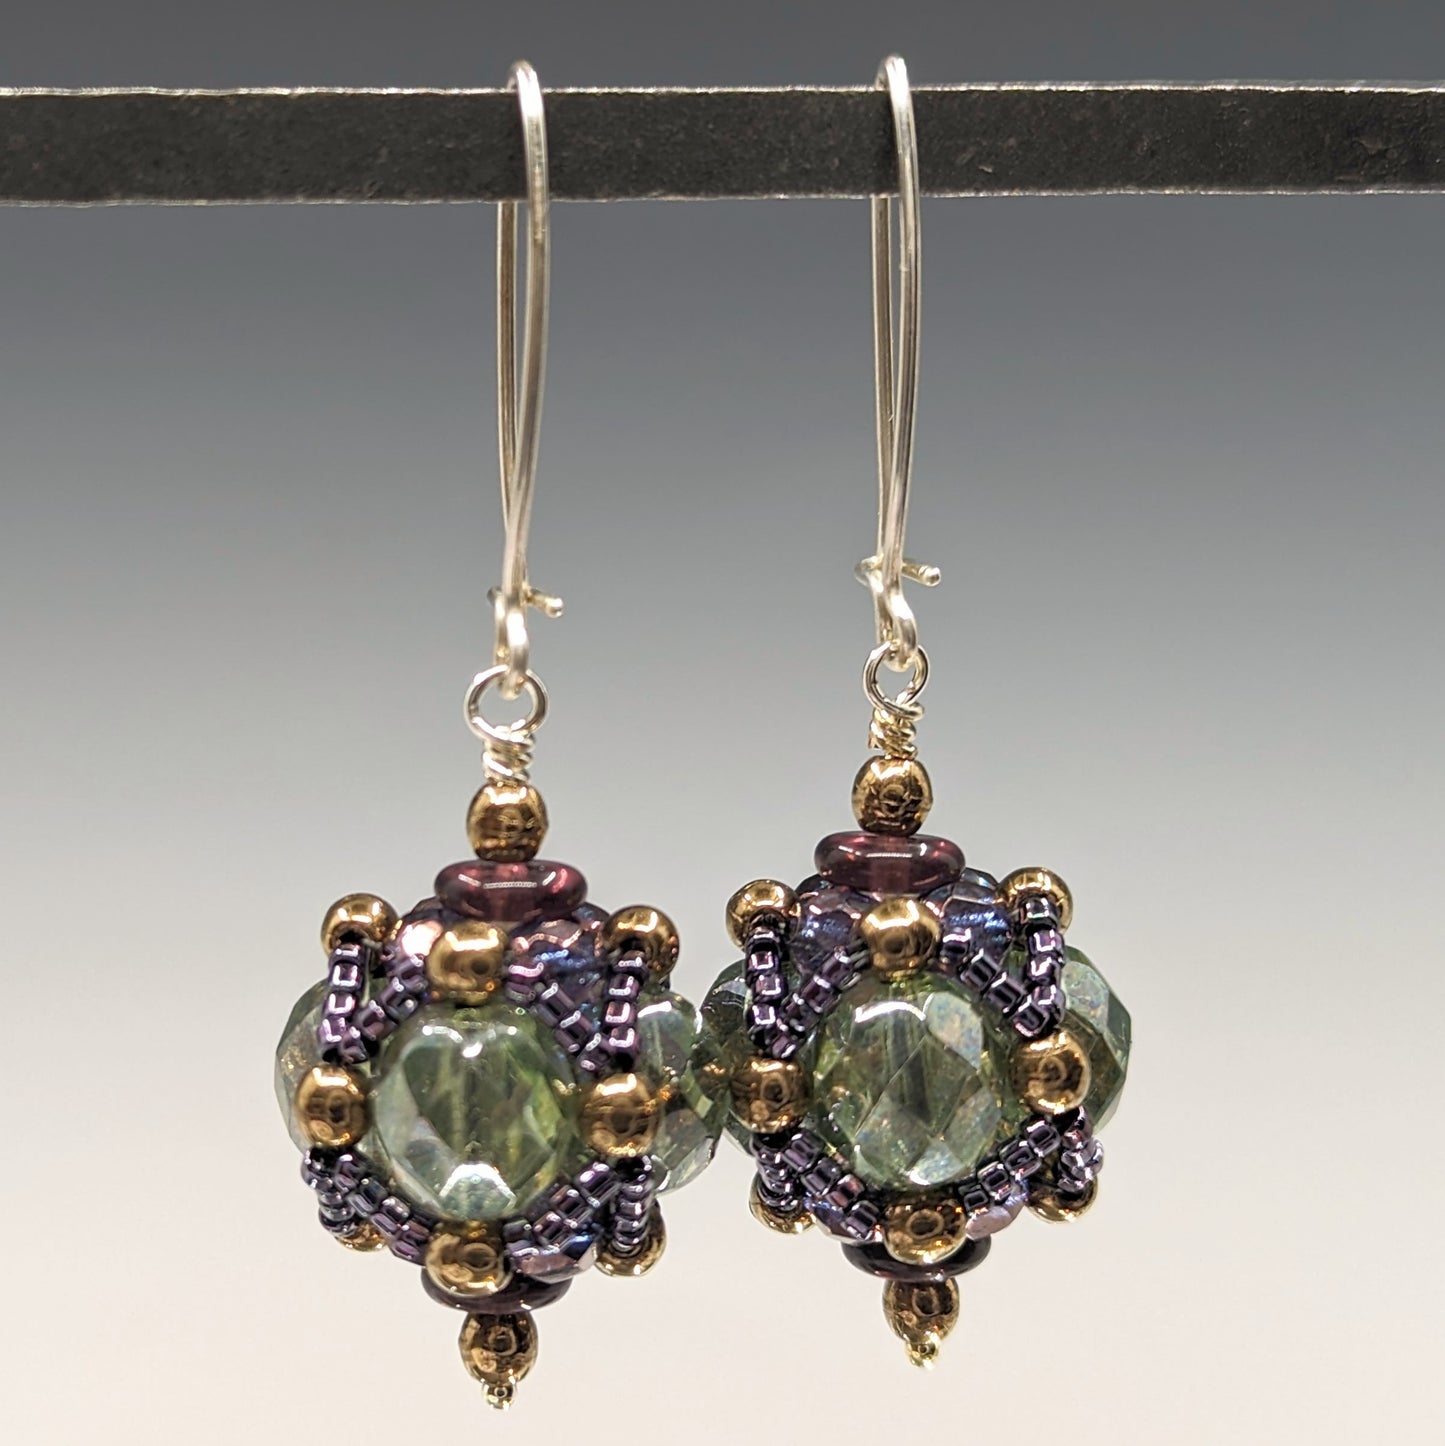 A pair of earrings hang from a black bar against a gray background. The earrings have long silver oval wires that latch and there is a beaded ball dangling from the bottom of each earring. The beaded beads are made from pale transparent green beads that have a layer of netted putple and bronze beads wrapped around them.